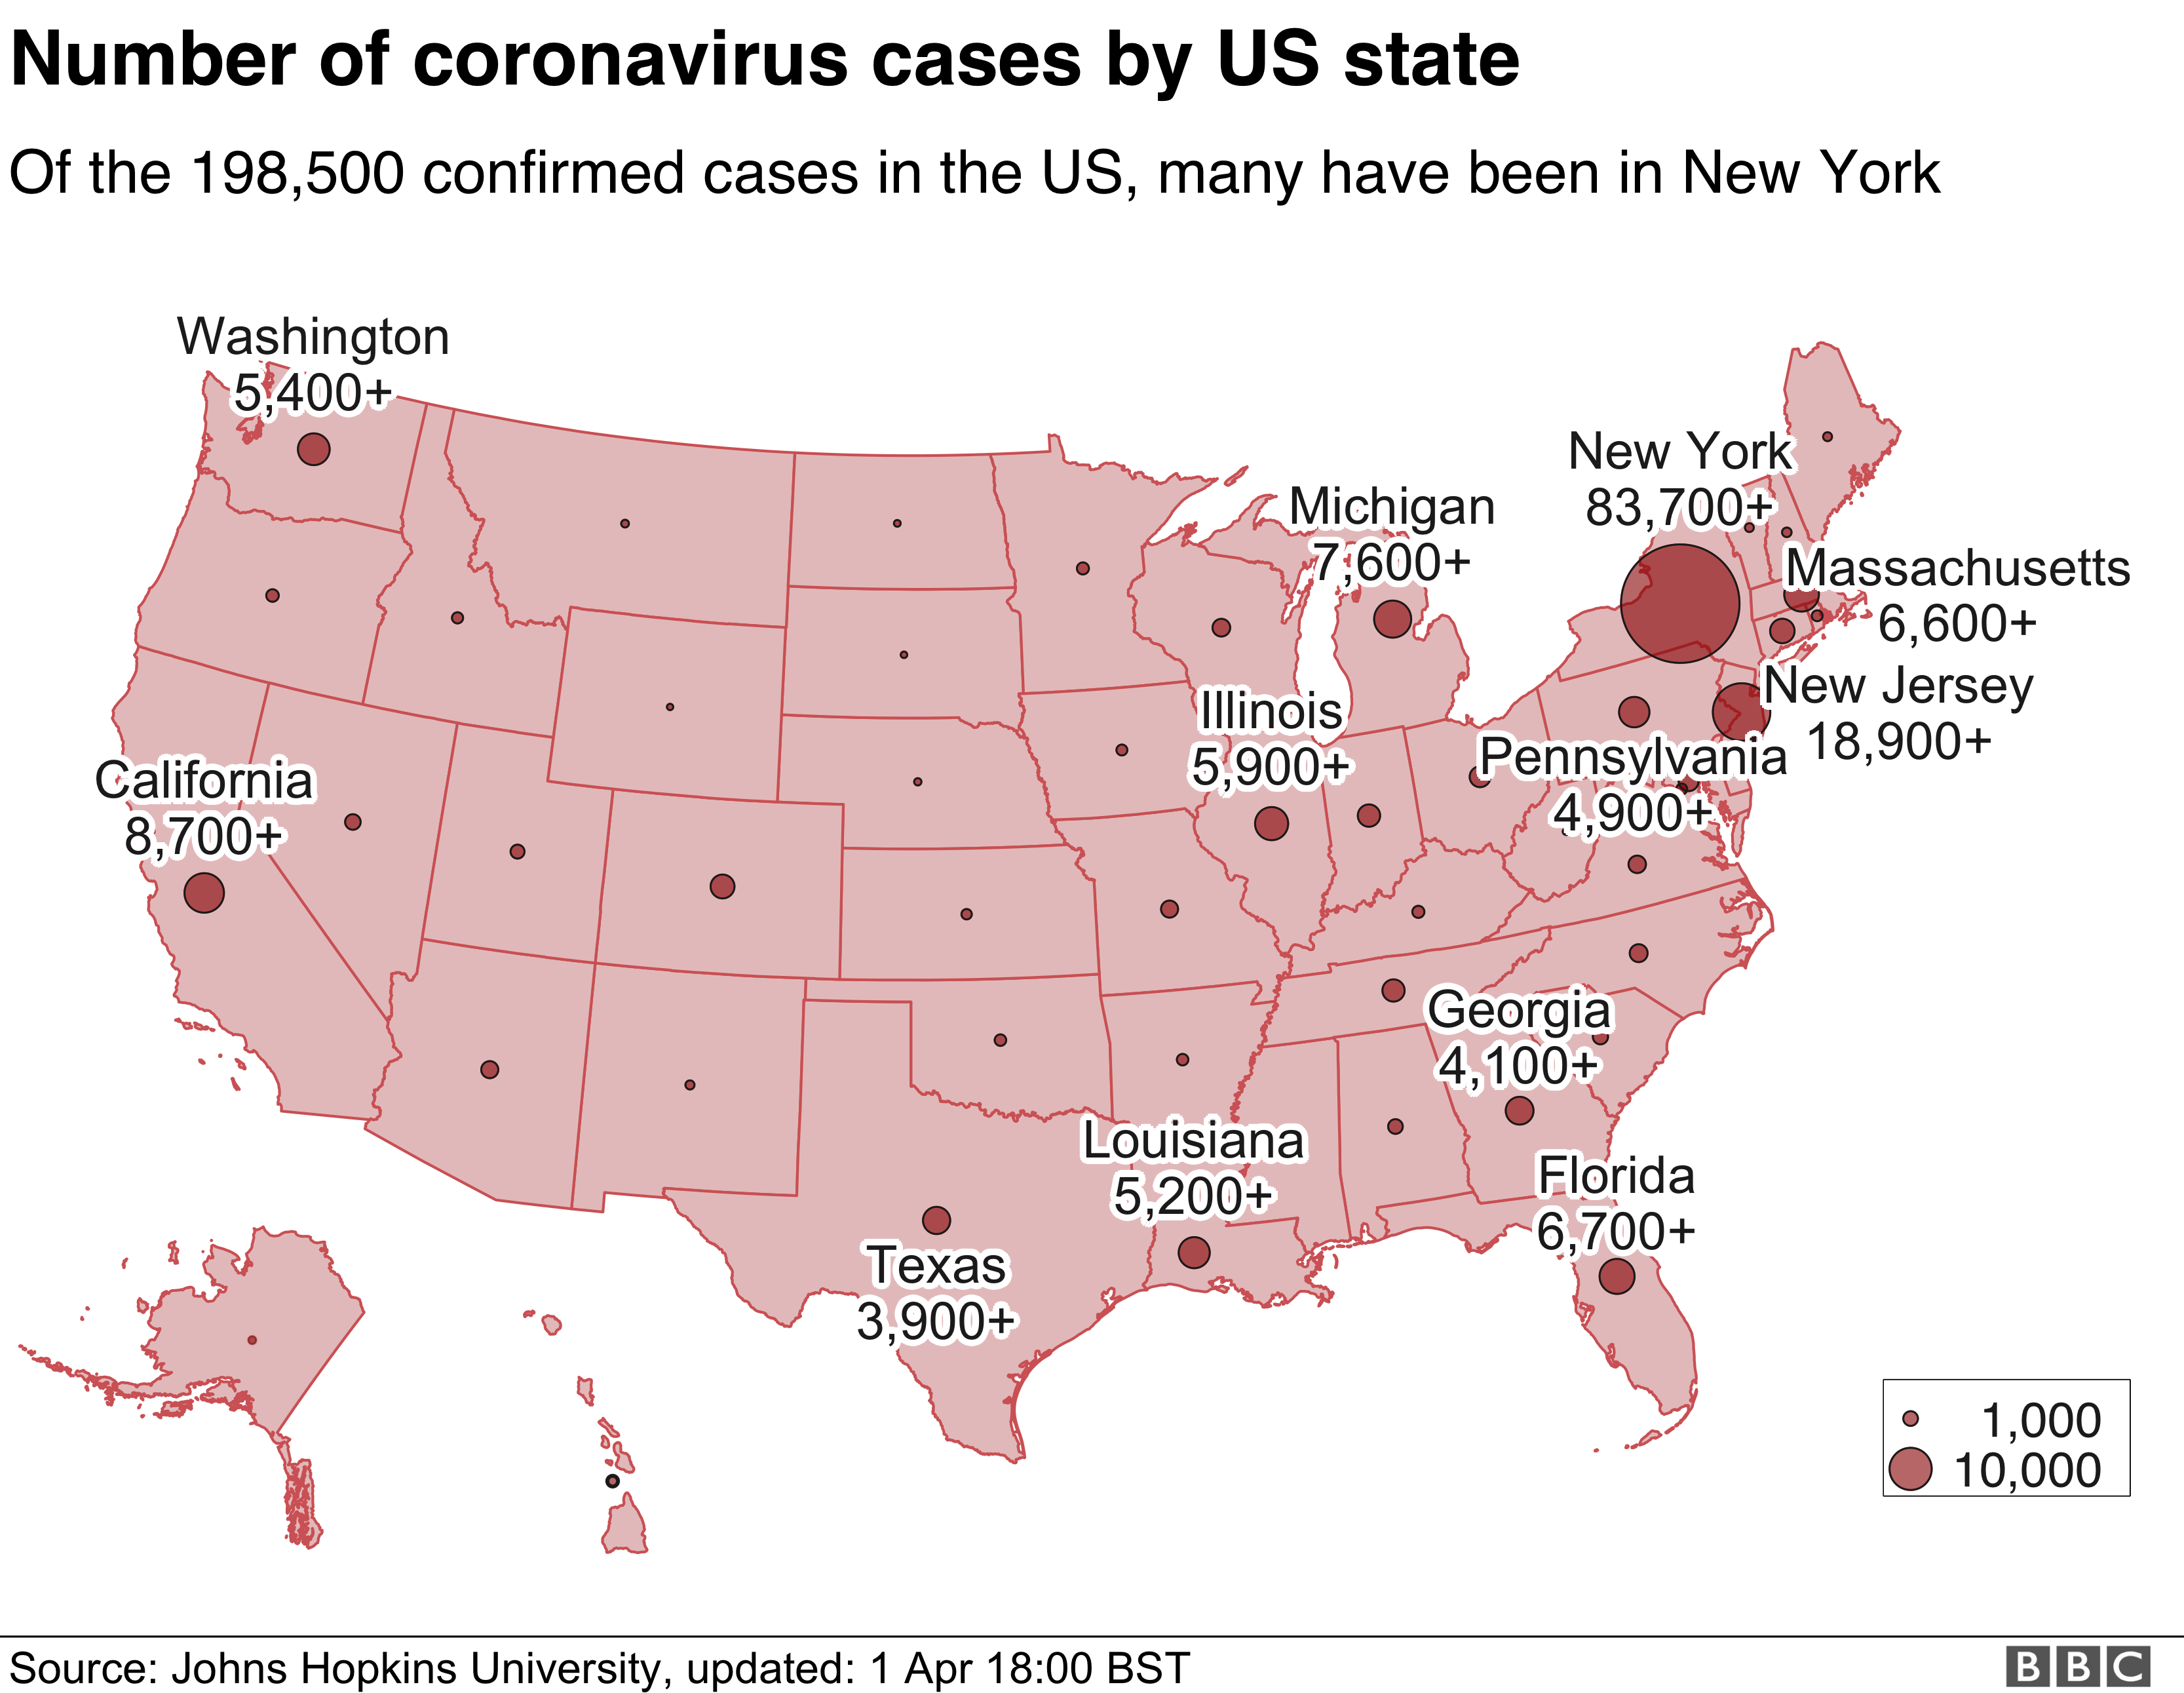 Map of the US showing which states have the most coronavirus cases